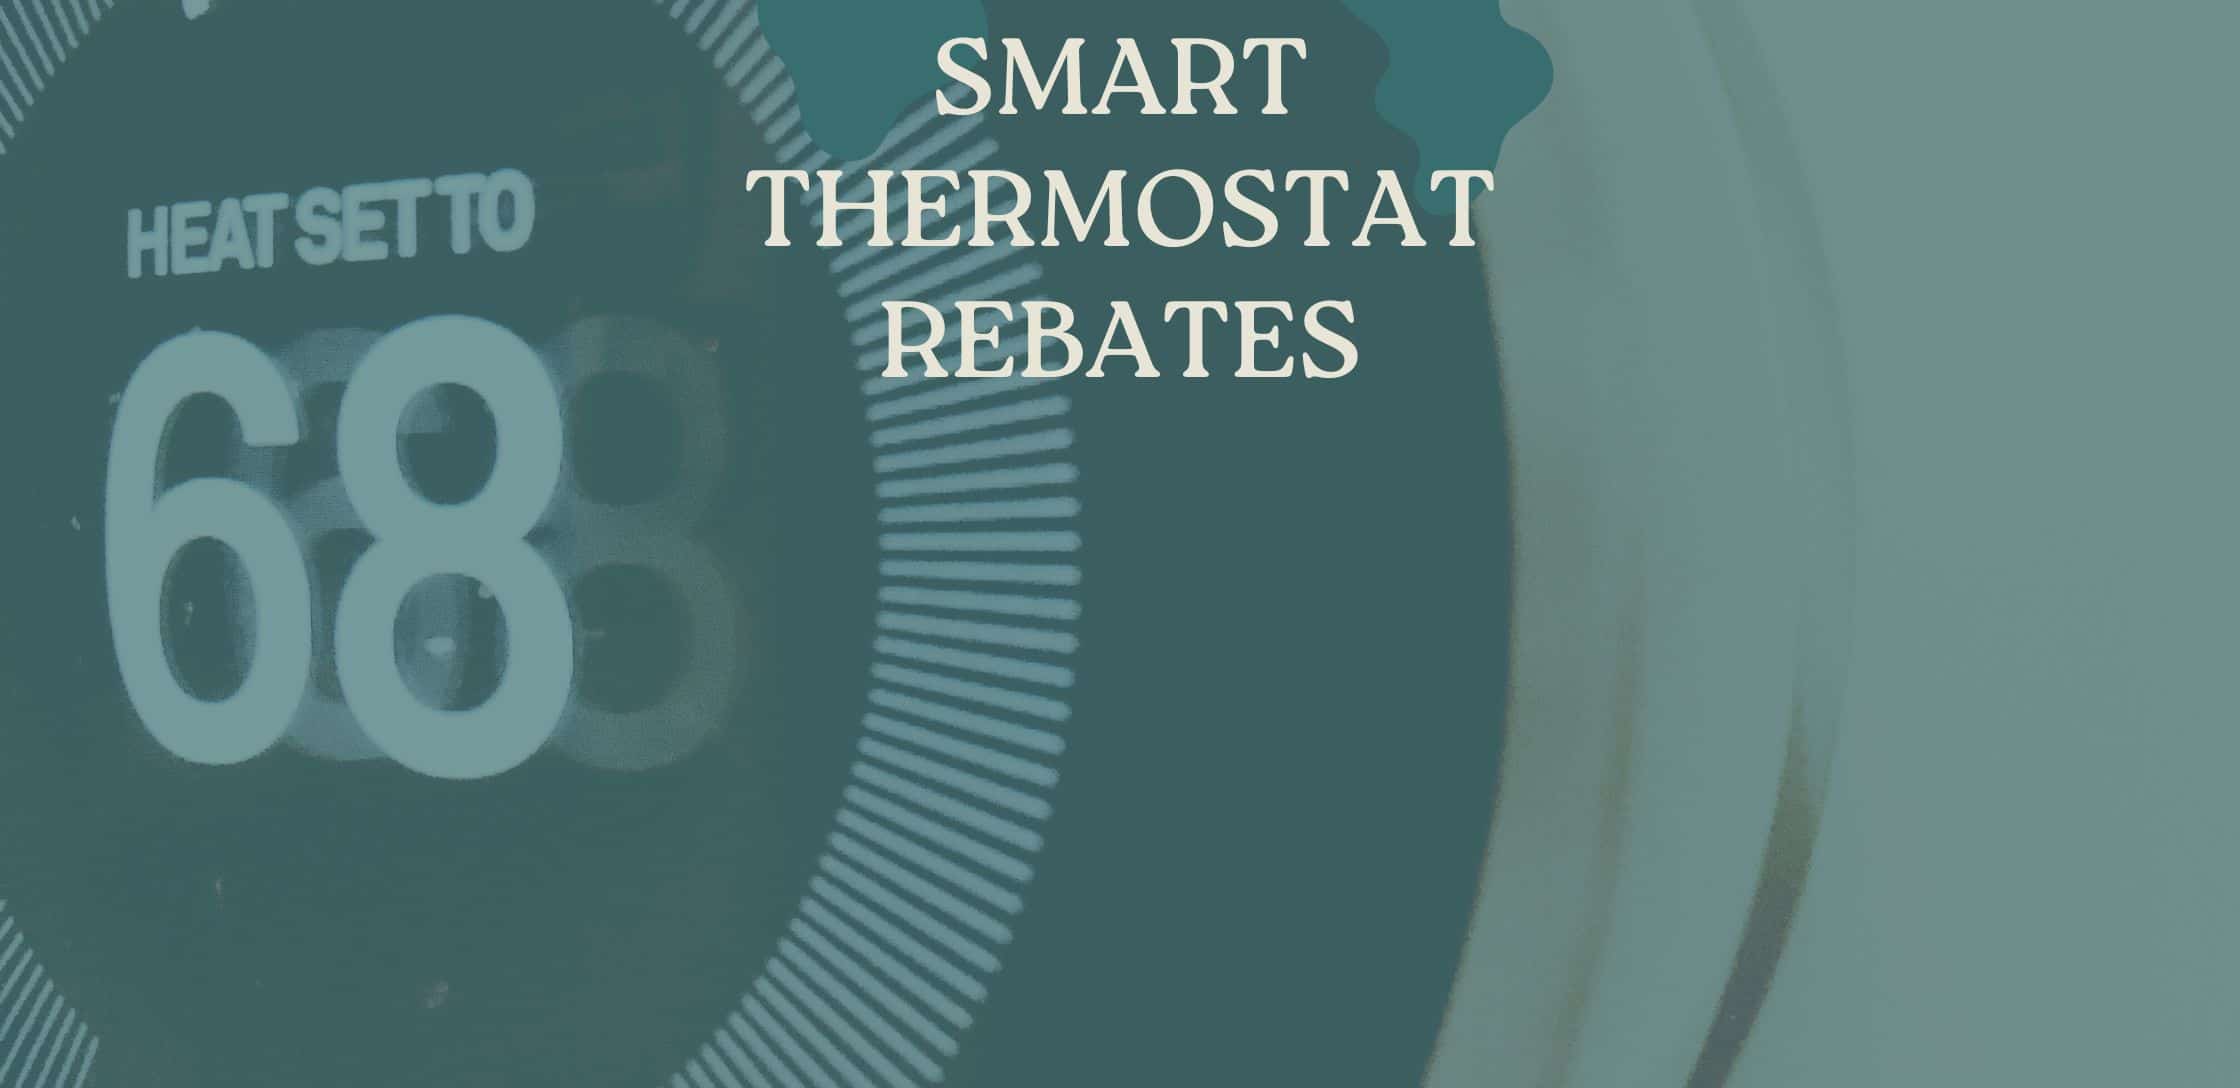 Pacific Power Smart Thermostat Rebate